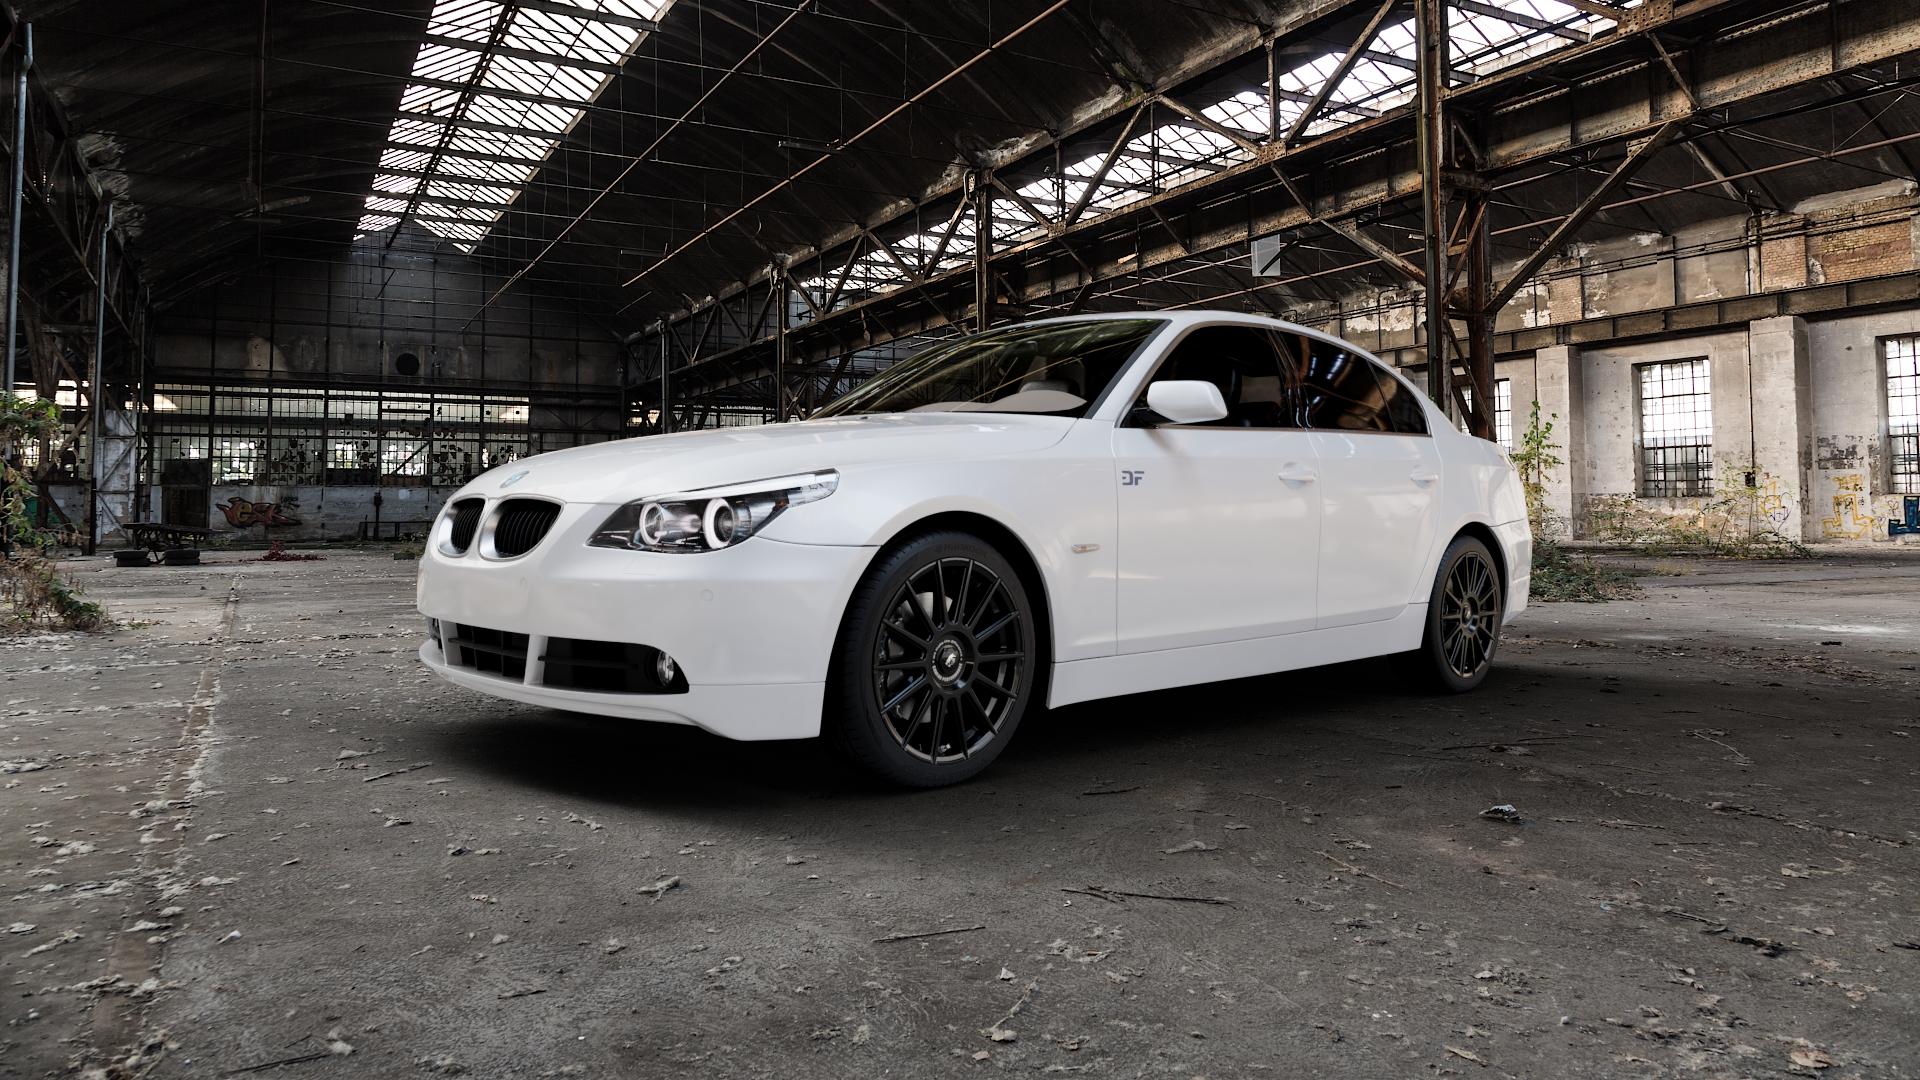 BMW 530xi Type E60 (Limousine) 3,0l 190kW (258 hp) Wheels and Tyre Packages